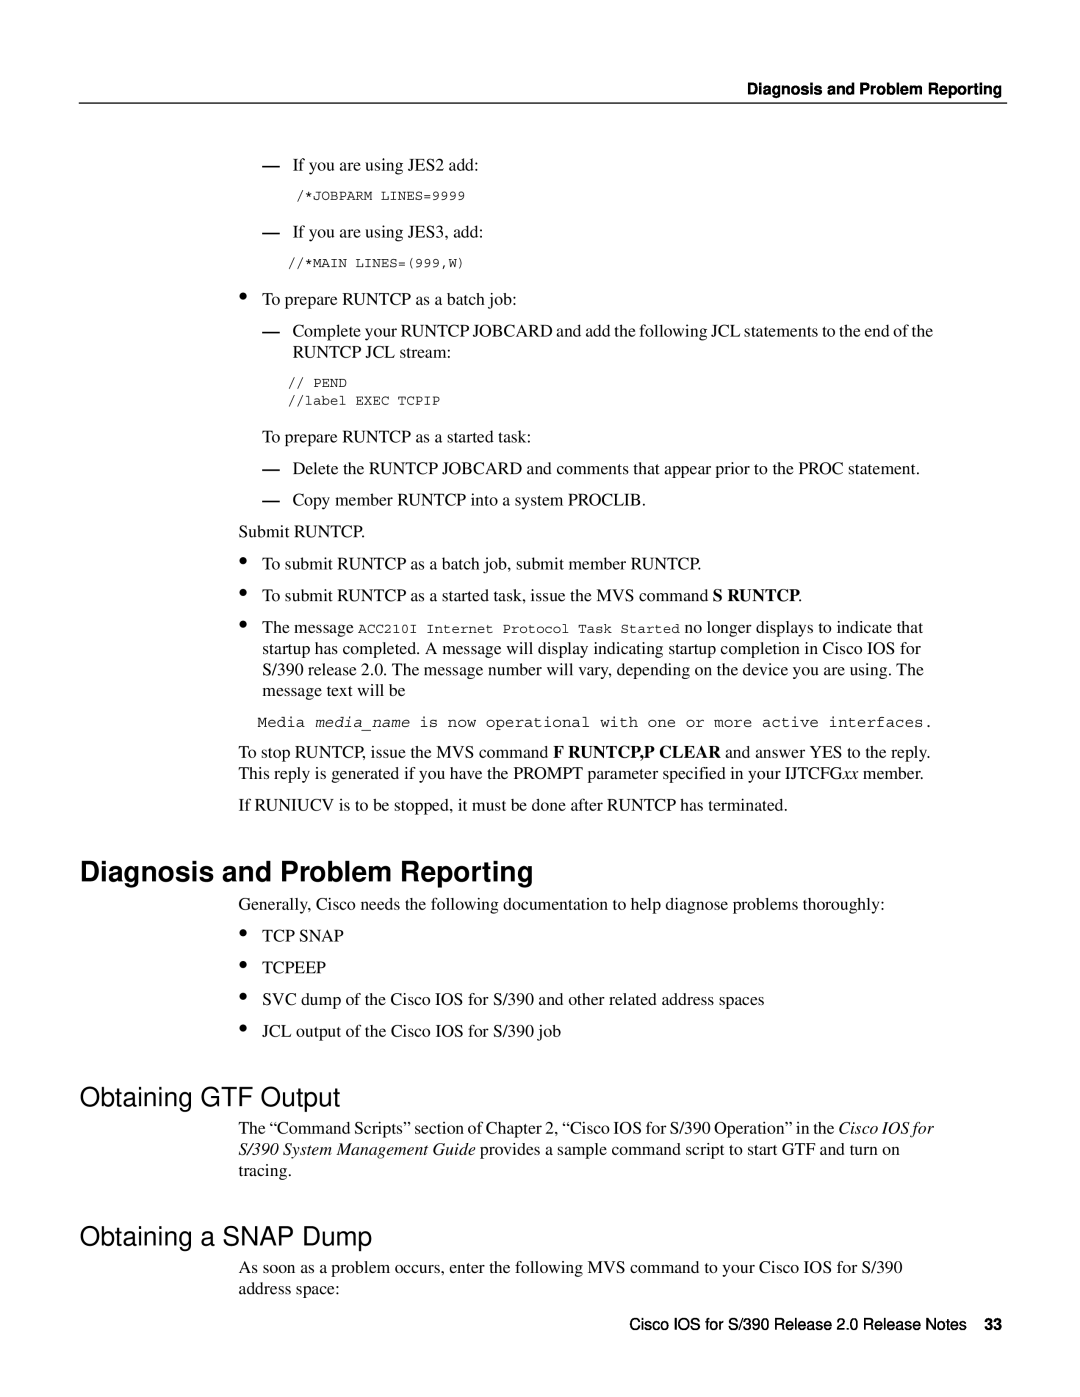 Cisco Systems S/390 manual Diagnosis and Problem Reporting, Obtaining GTF Output, Obtaining a SNAP Dump 